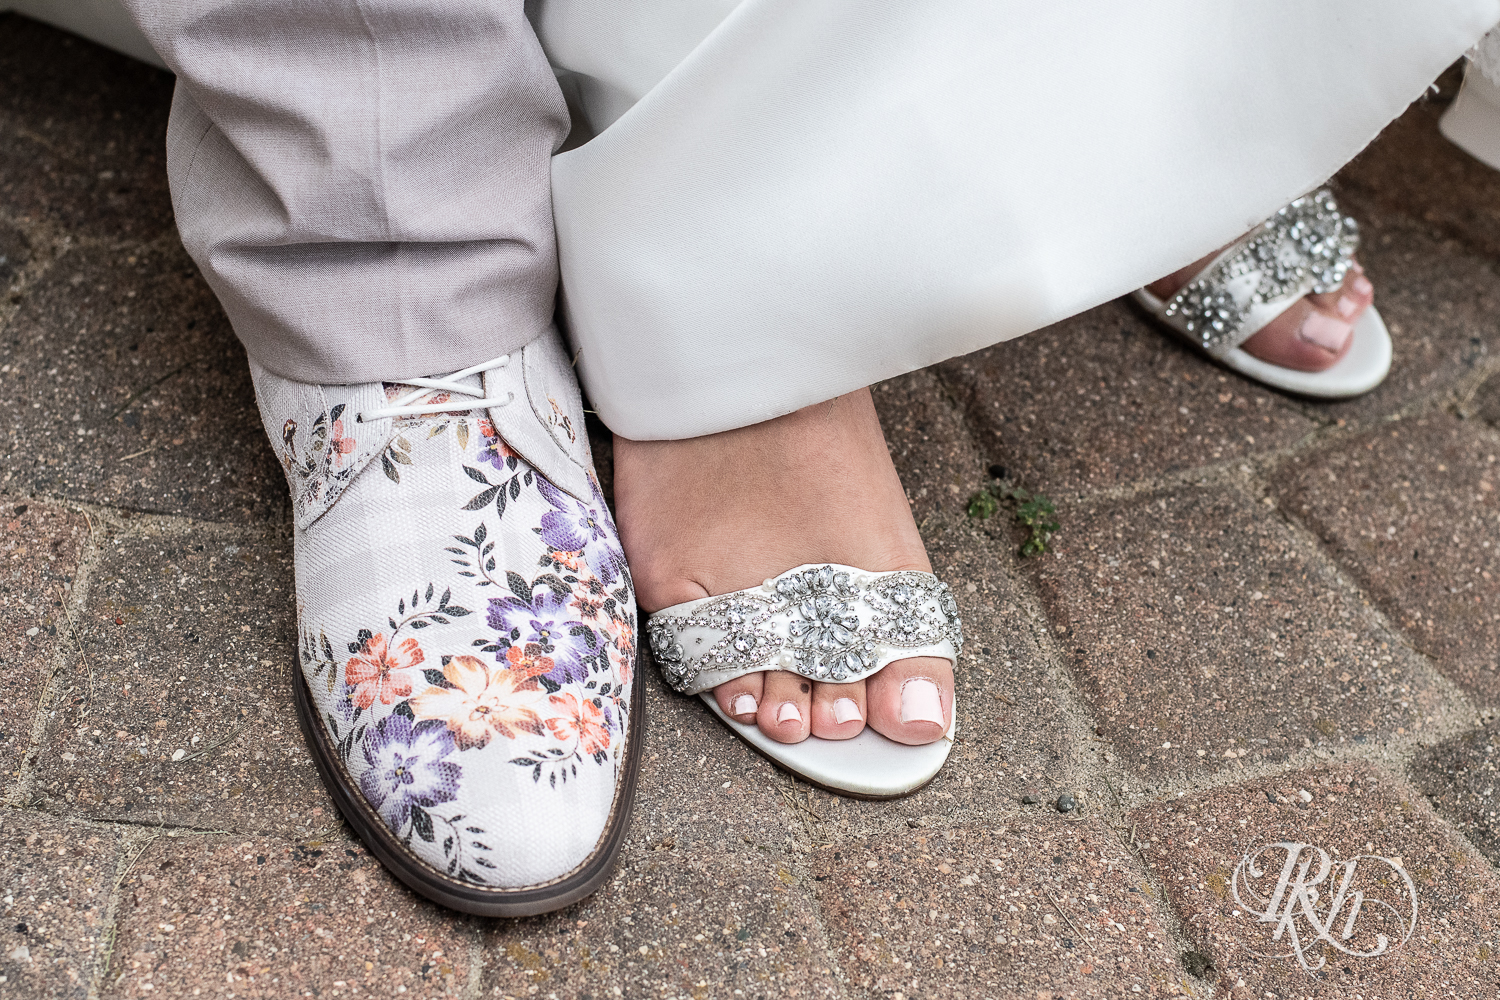 Wedding bride and groom shoes